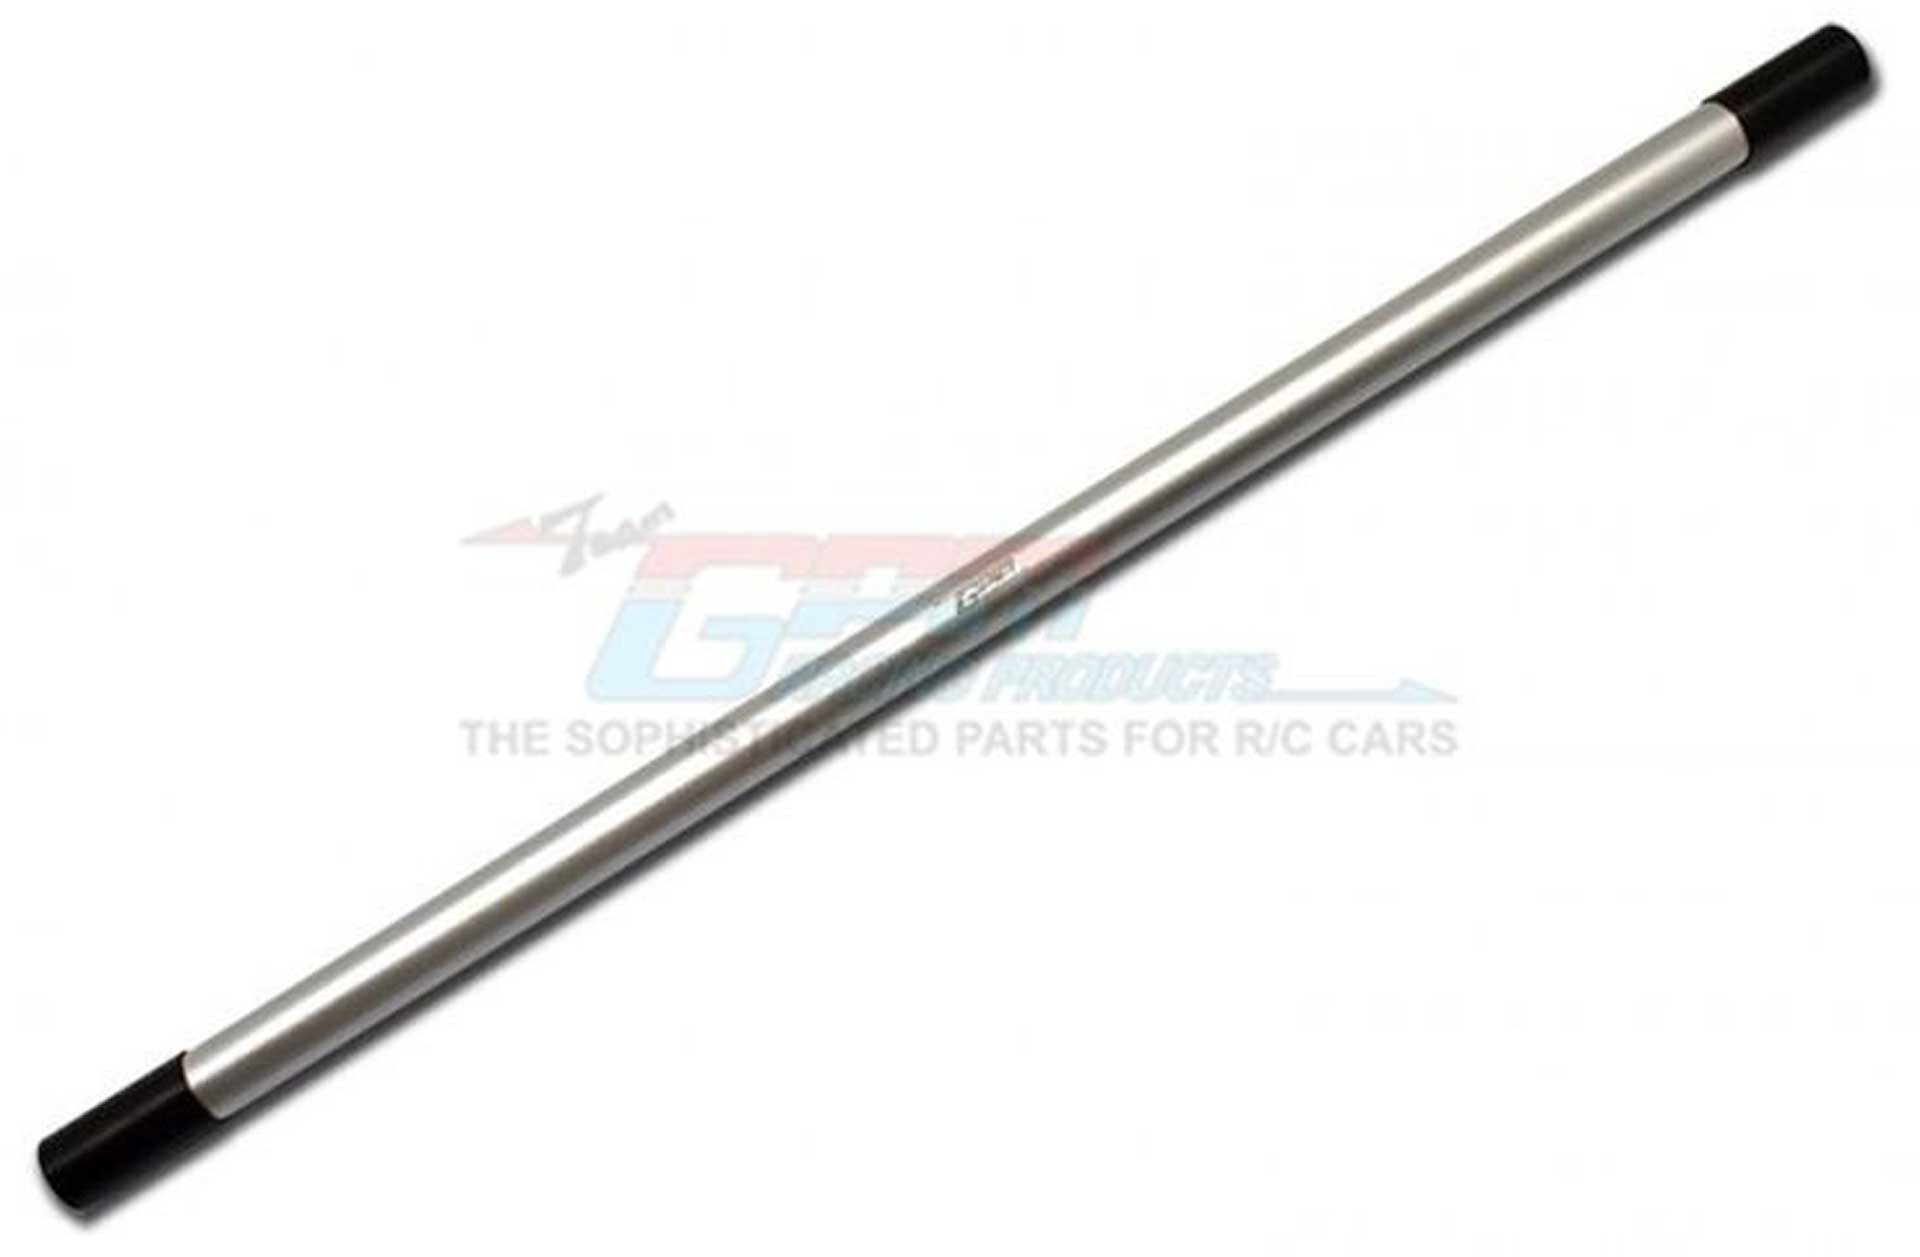 GPM Aluminum Center Drive Shaft With Hard Steel Joints - 1 pc TRAXXAS X-MAXX silver